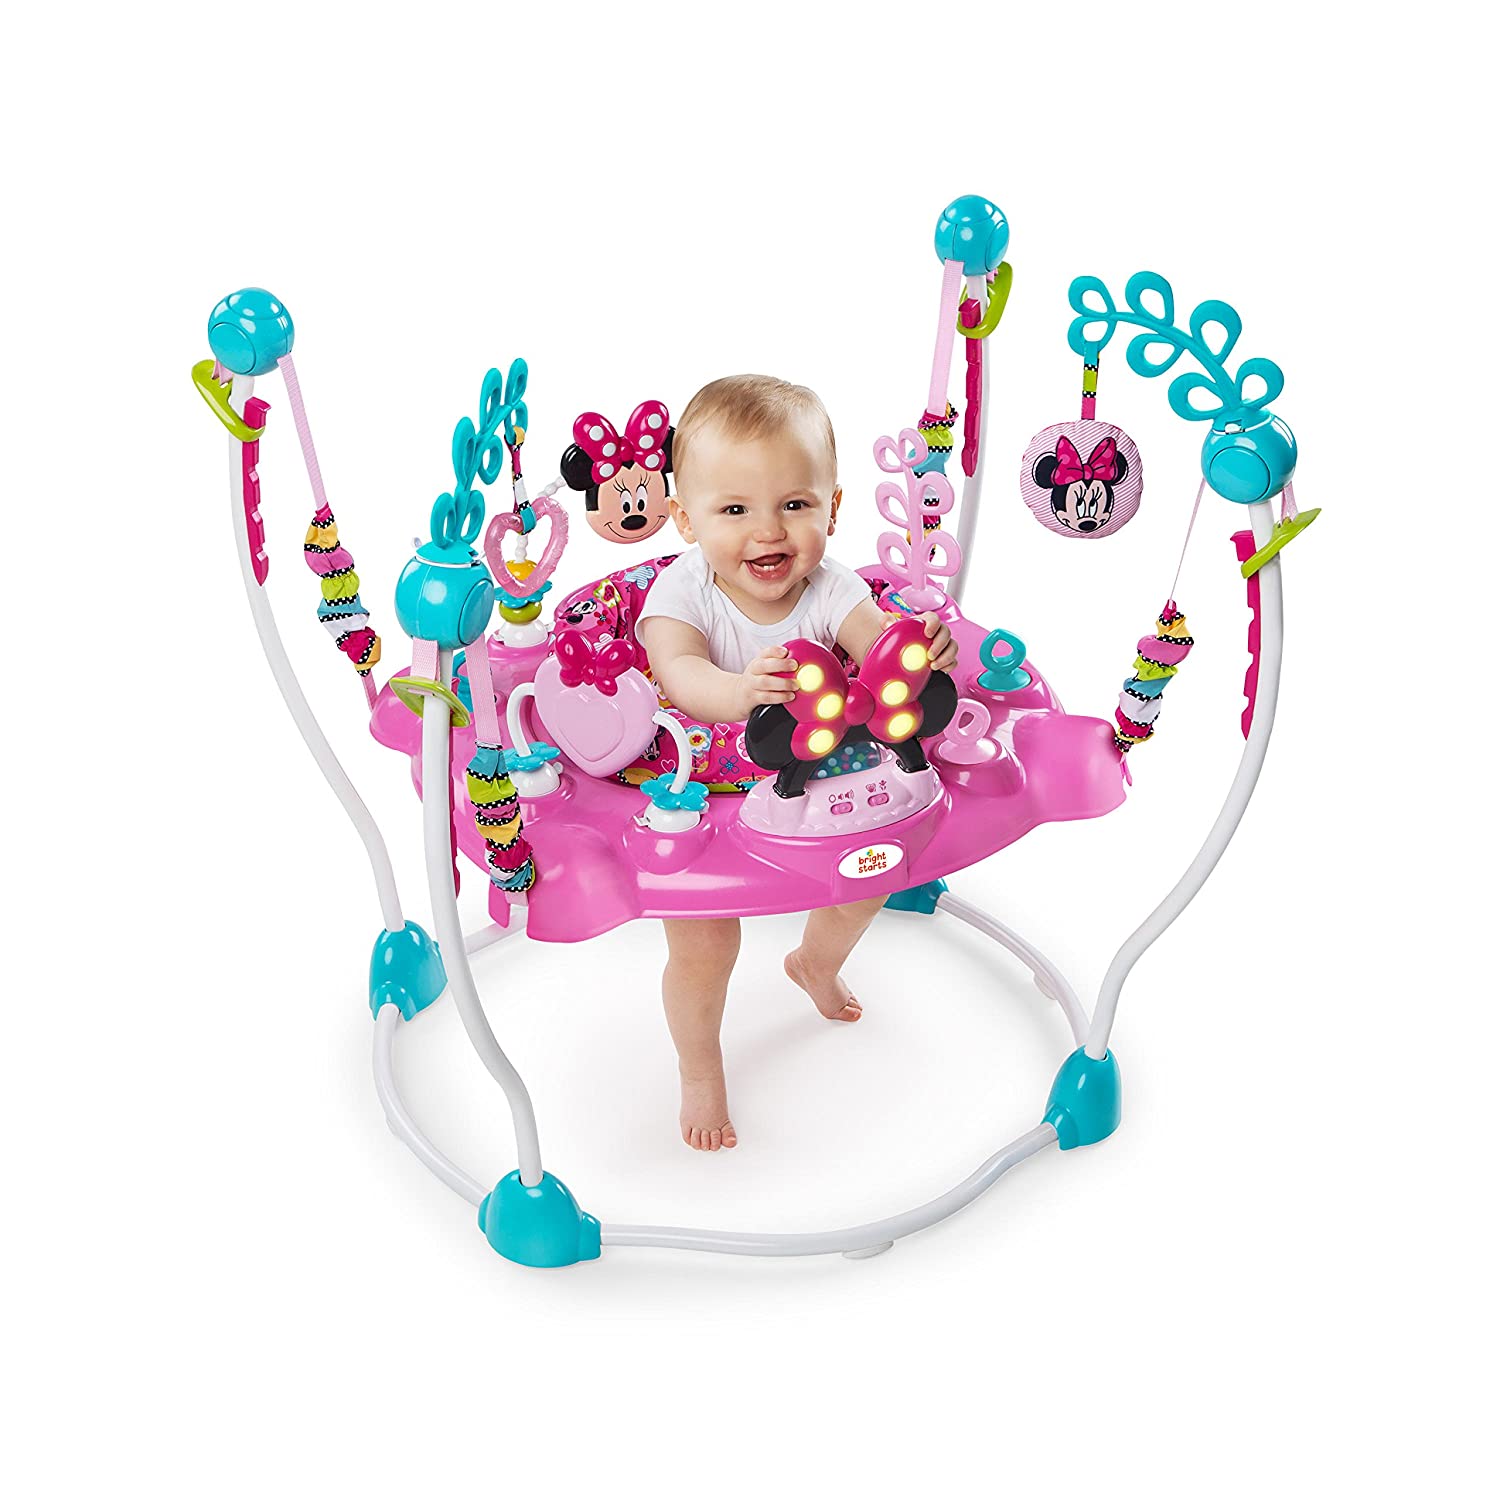 Bright Starts Disney Jumperoo Minnie Mouse - Pink.